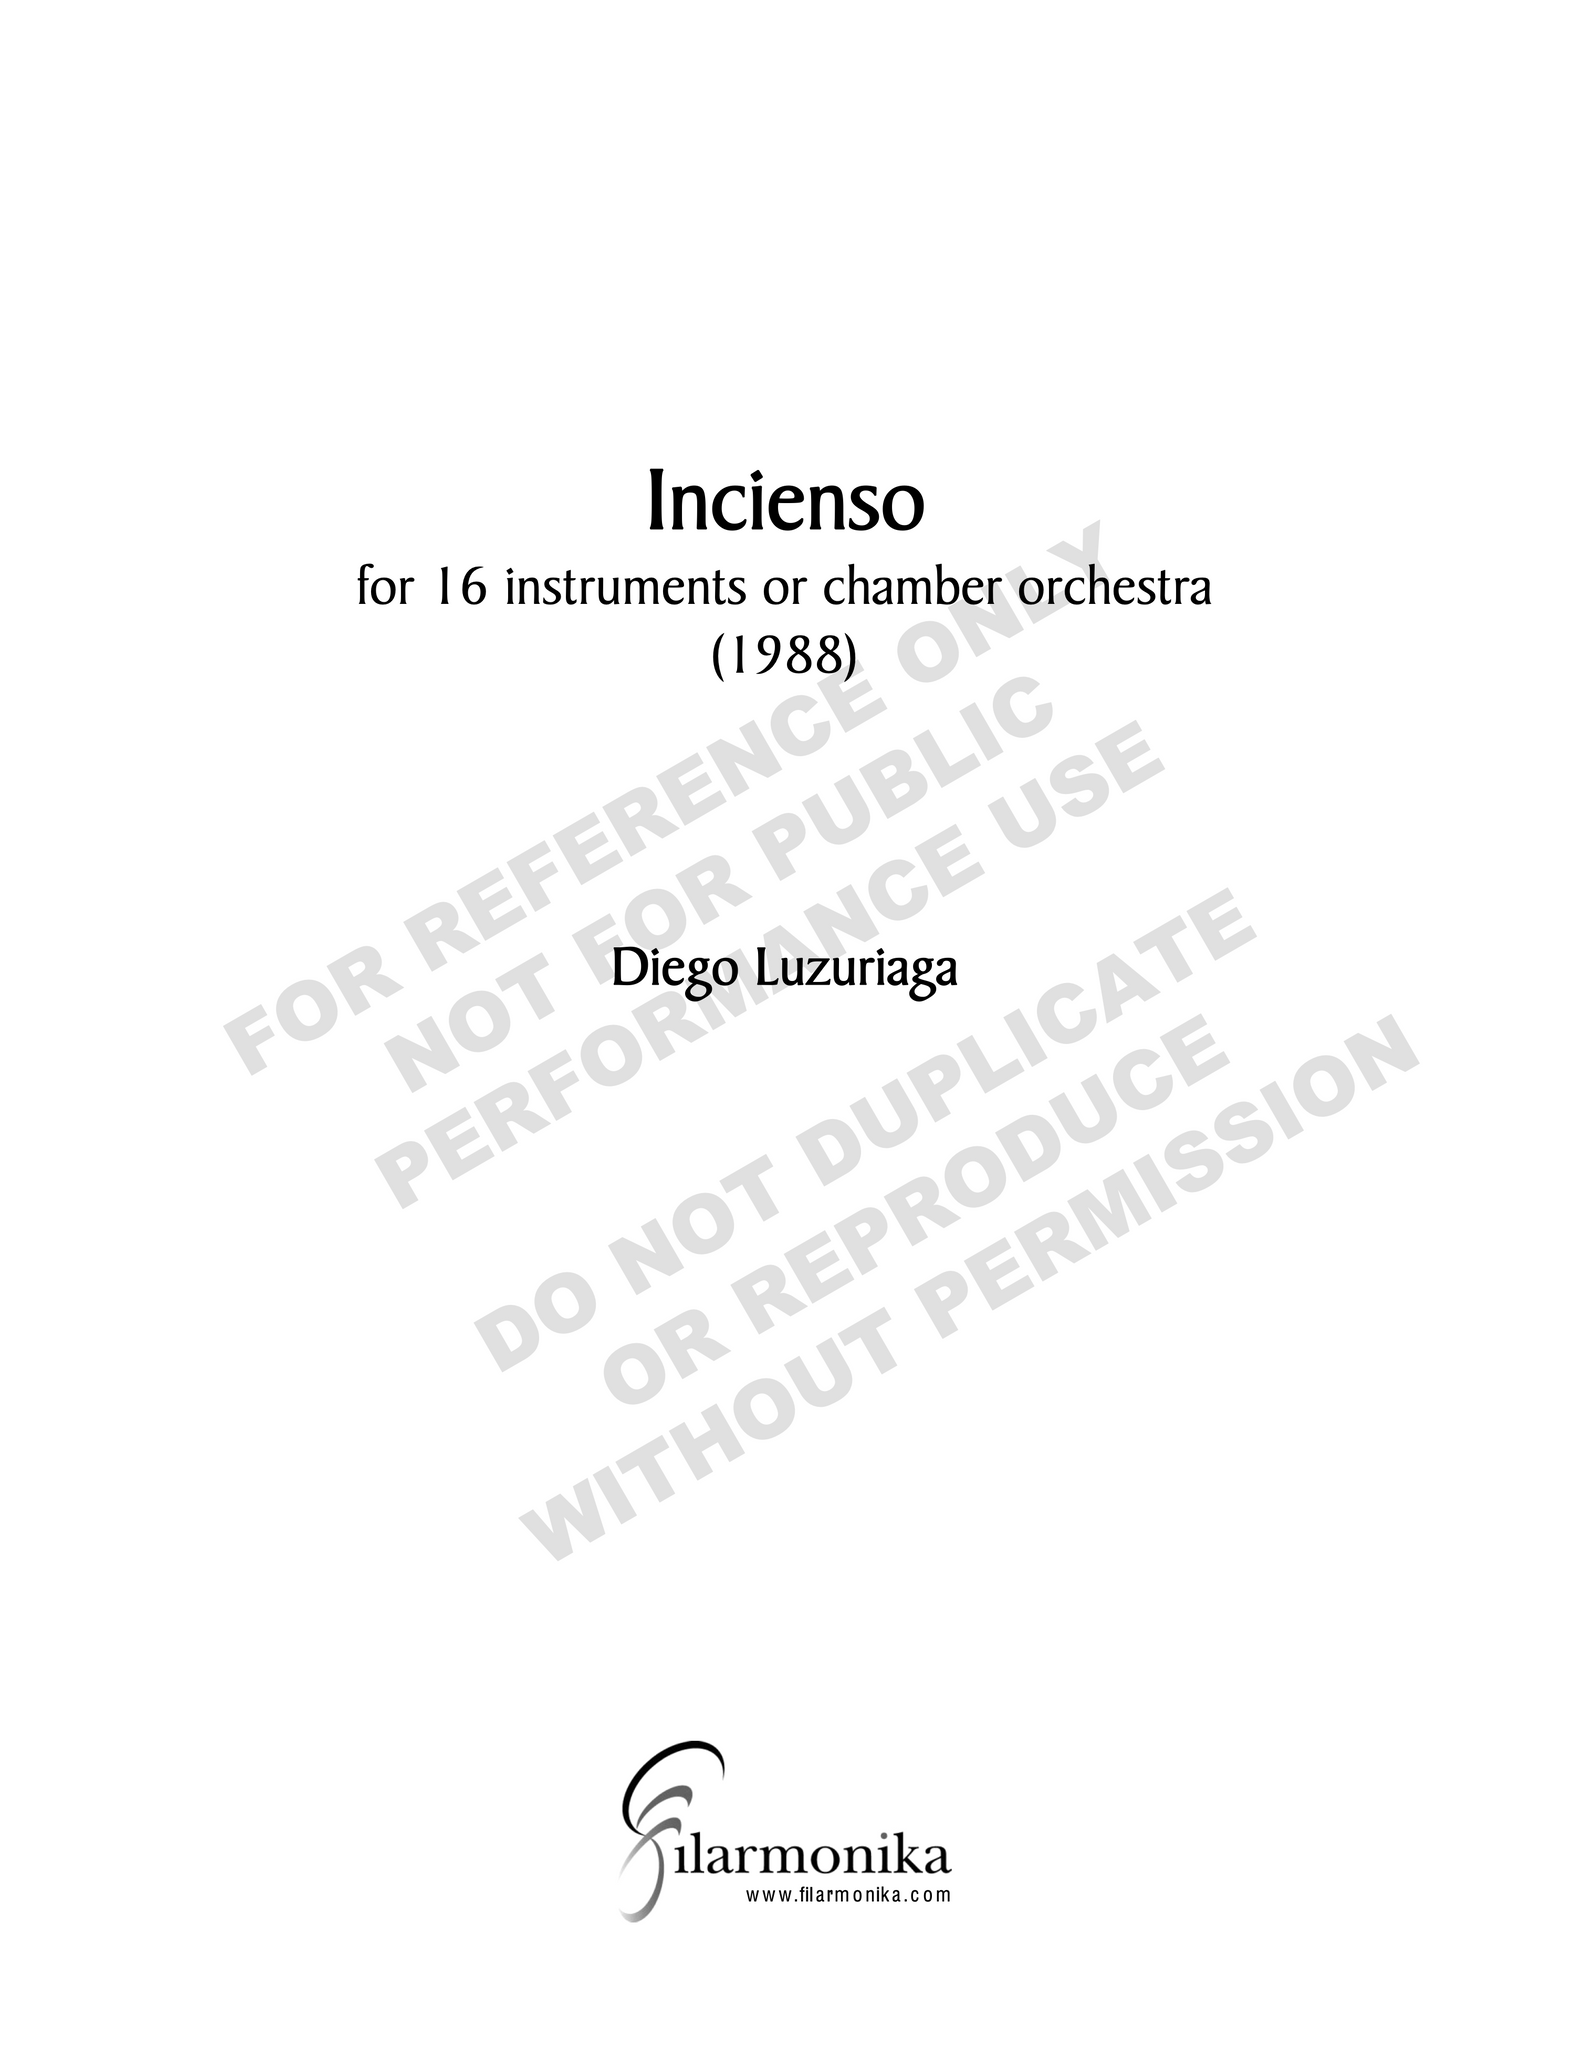 Incienso, for chamber orchestra or ensemble